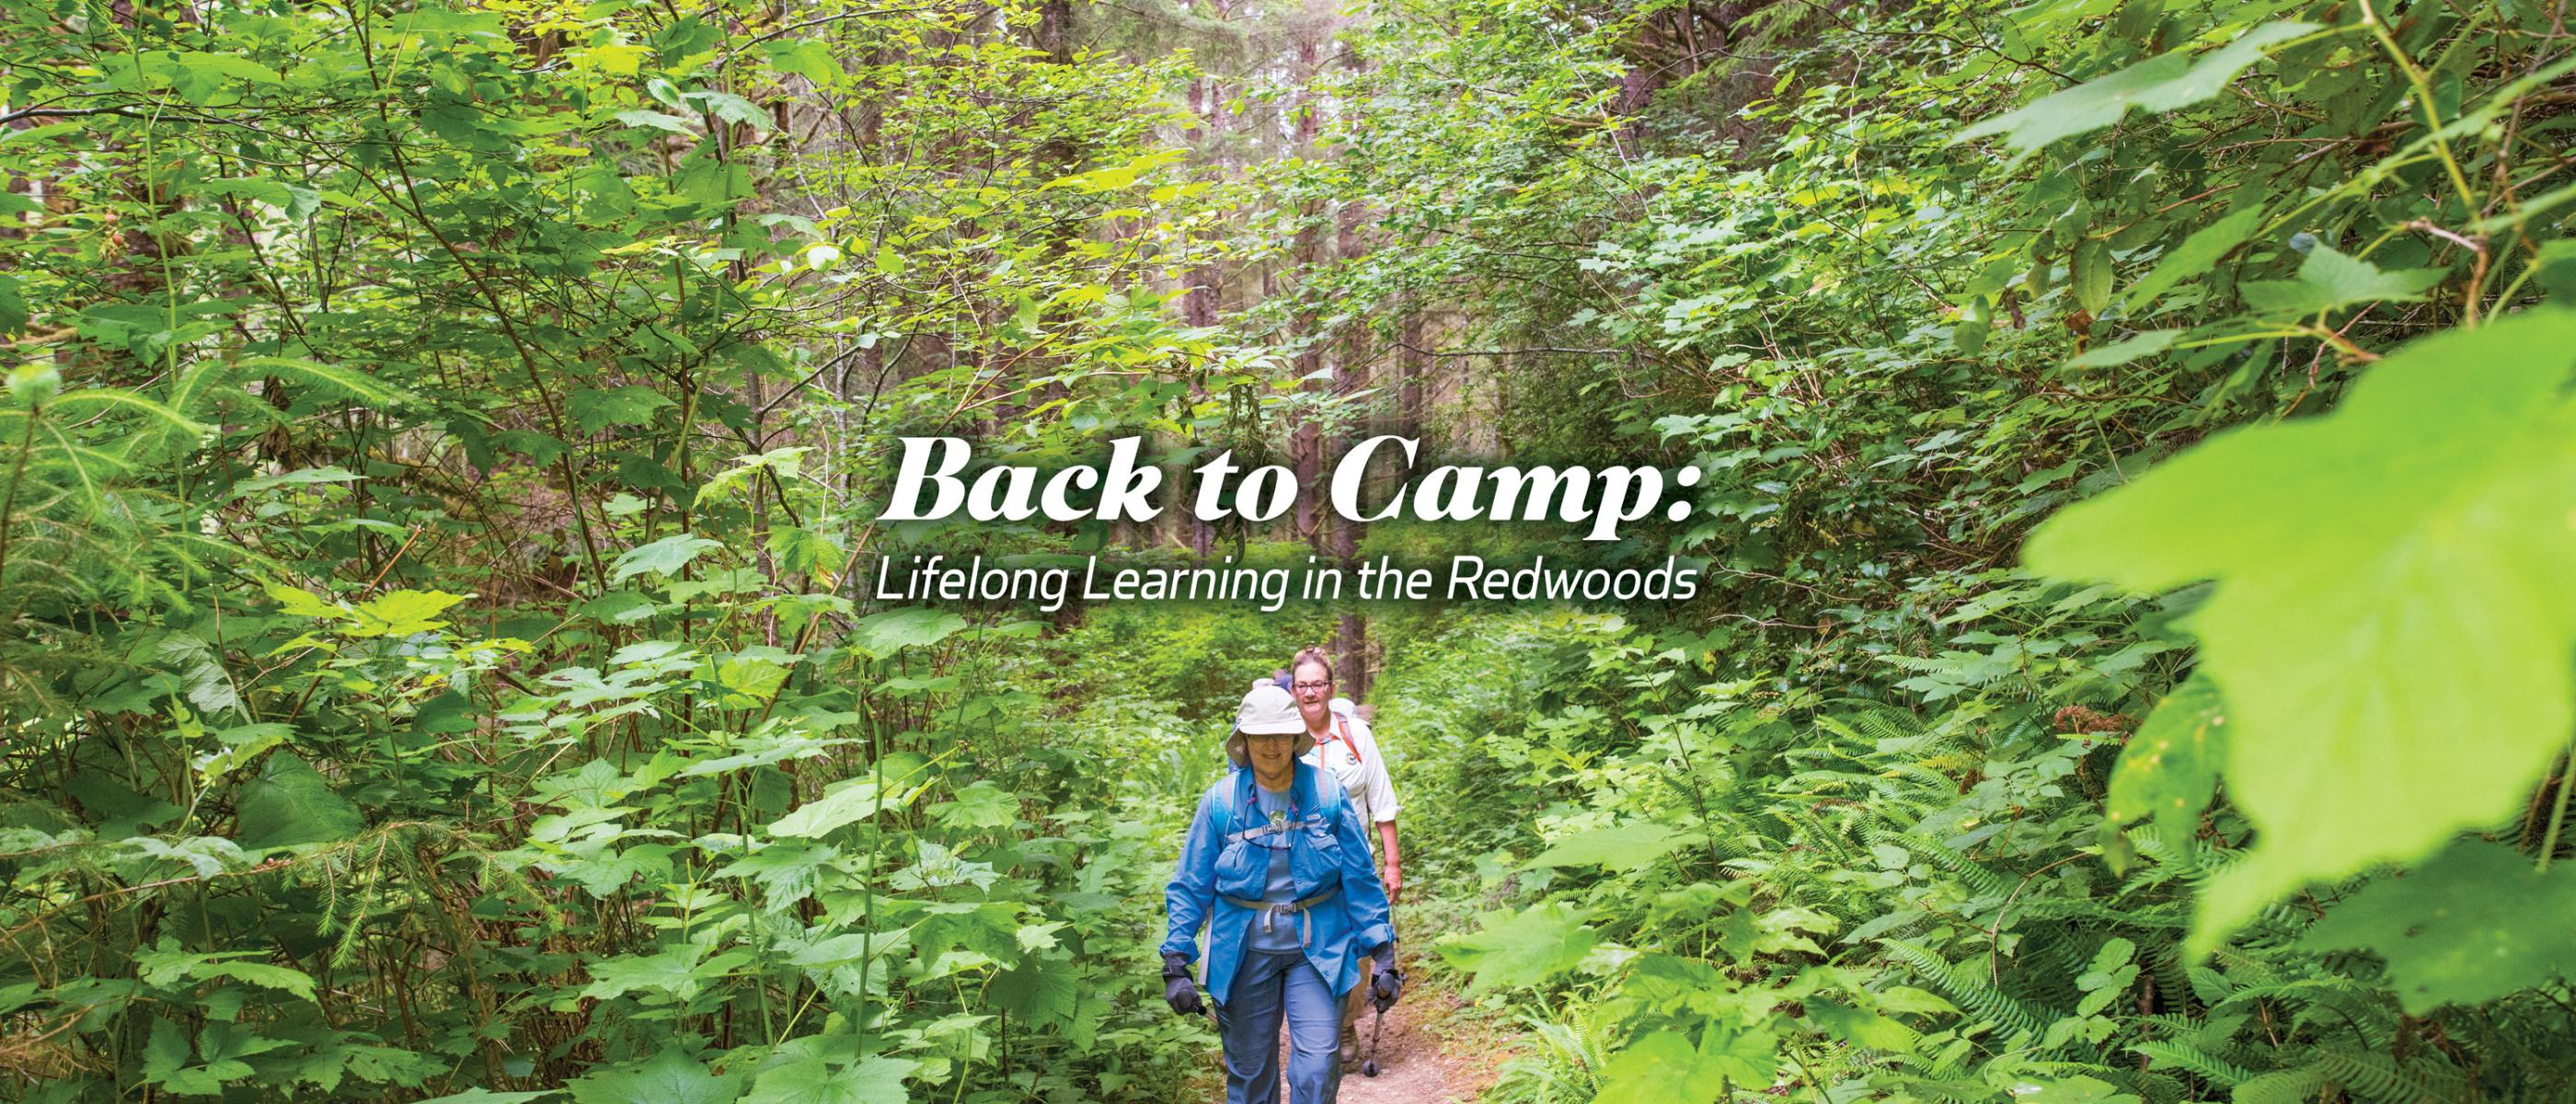 Back to Camp: Lifelong Learning in the Redwoods - image of hikers in forest